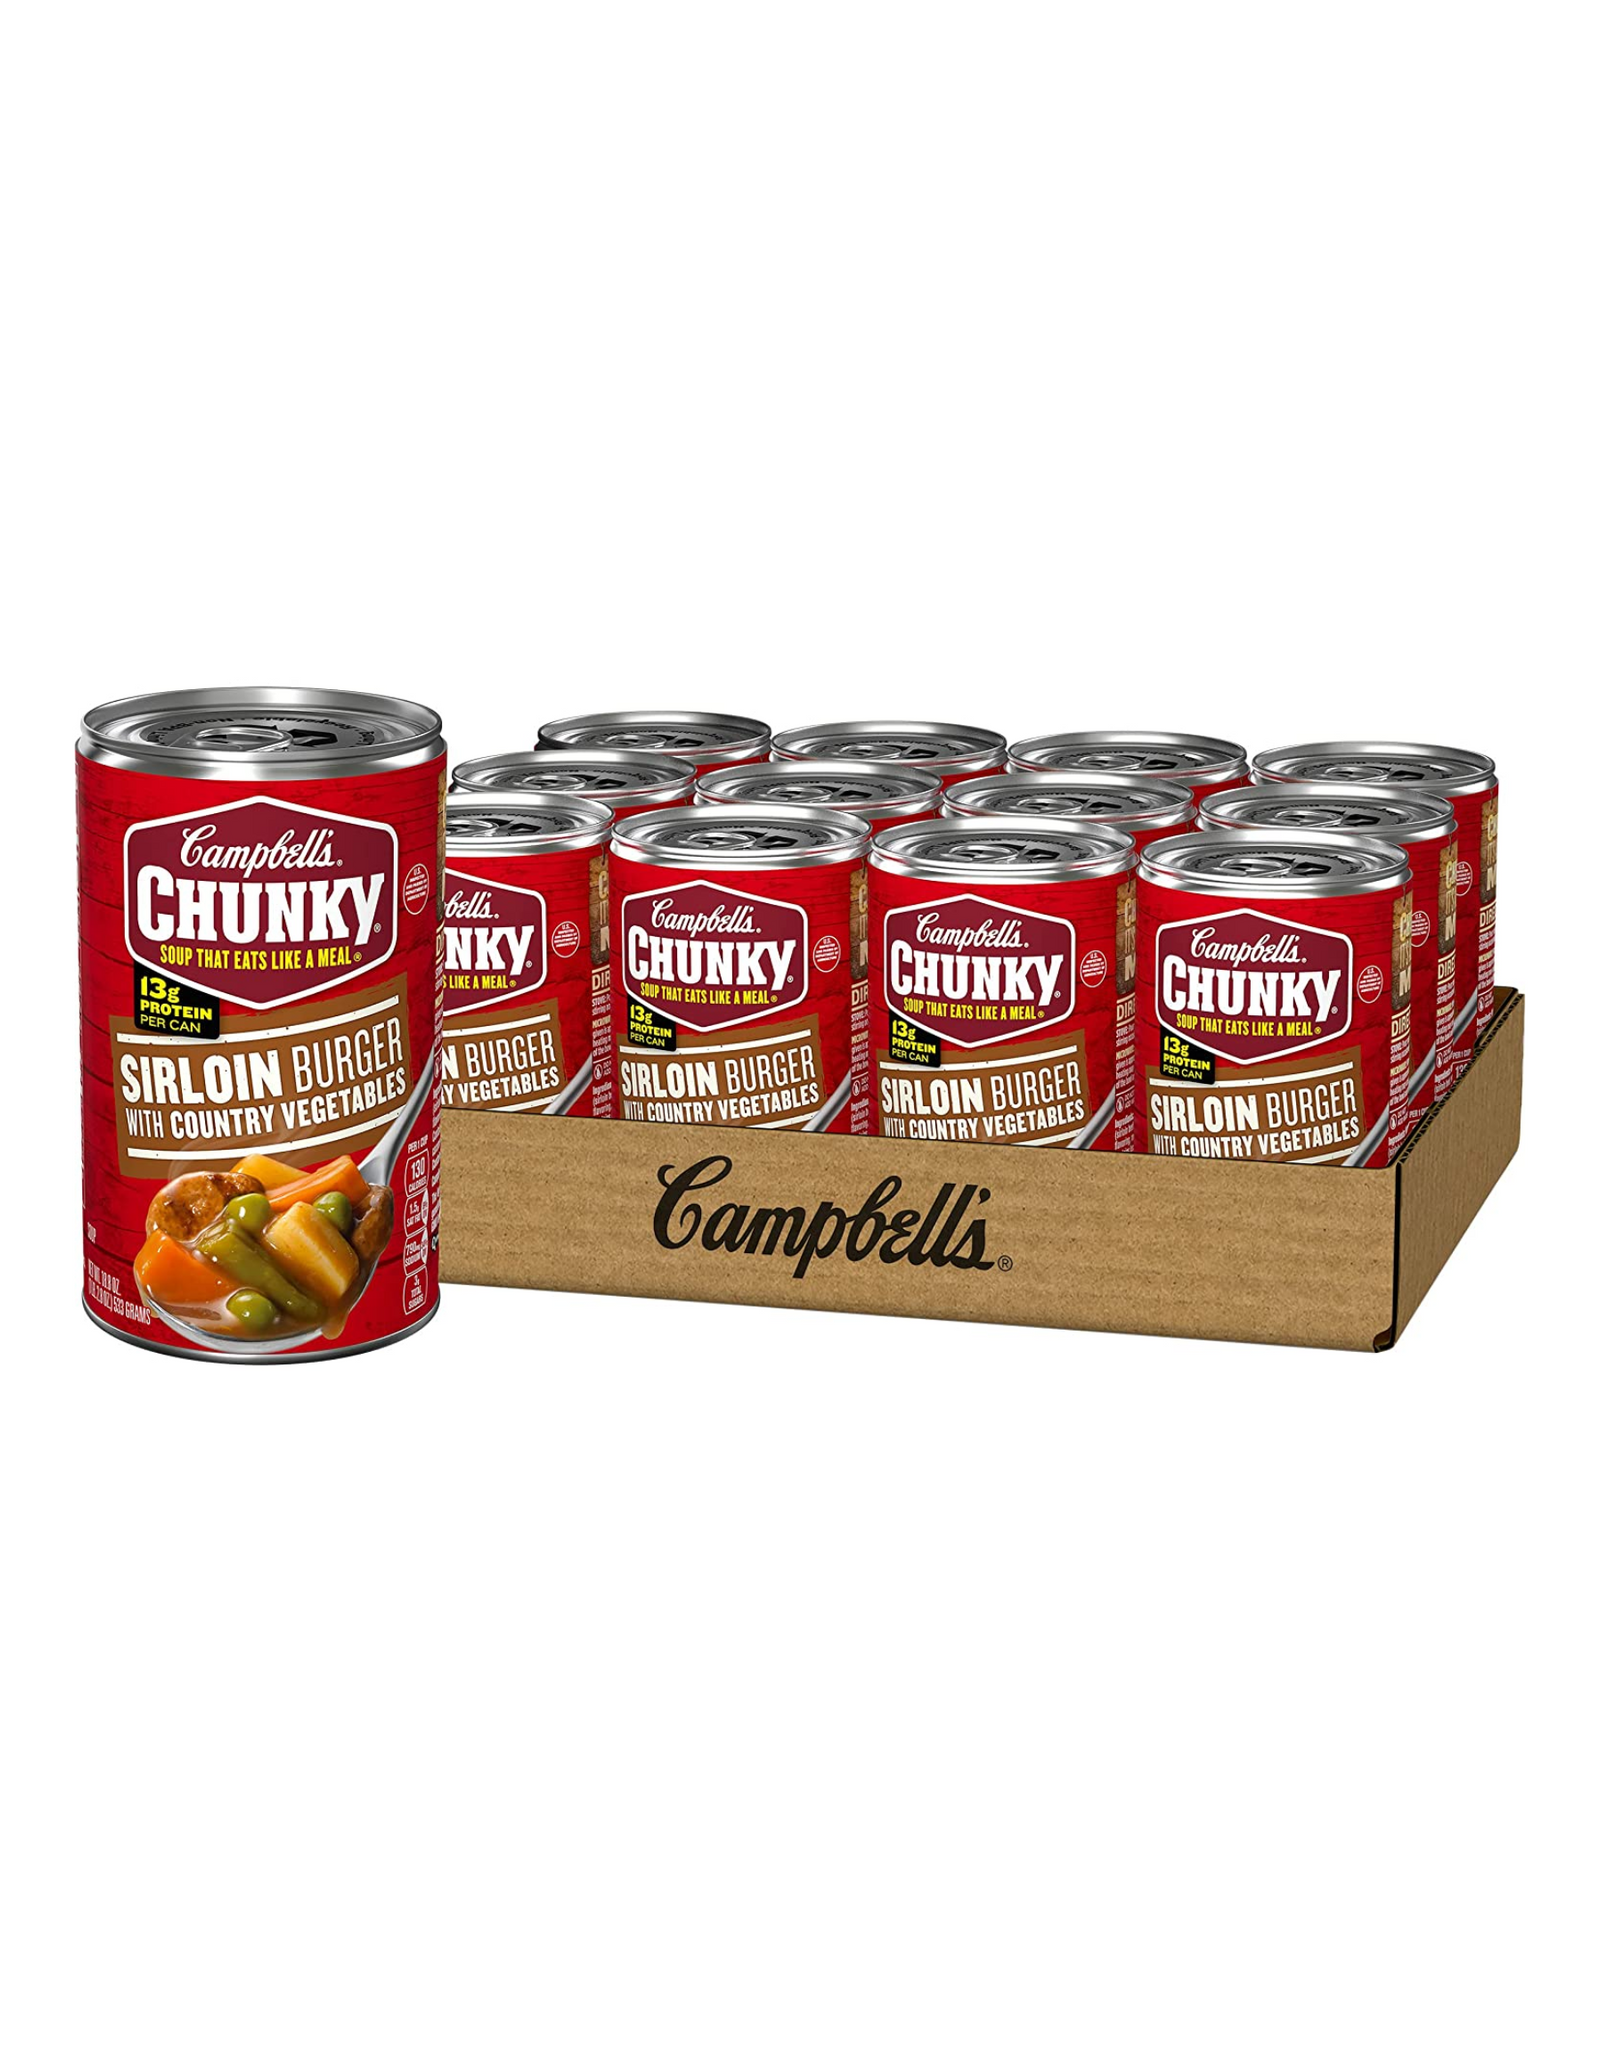 Campbell's Chunky Soup, Sirloin Burger With Country Vegetables Soup, 18.8 oz, 12 Cans